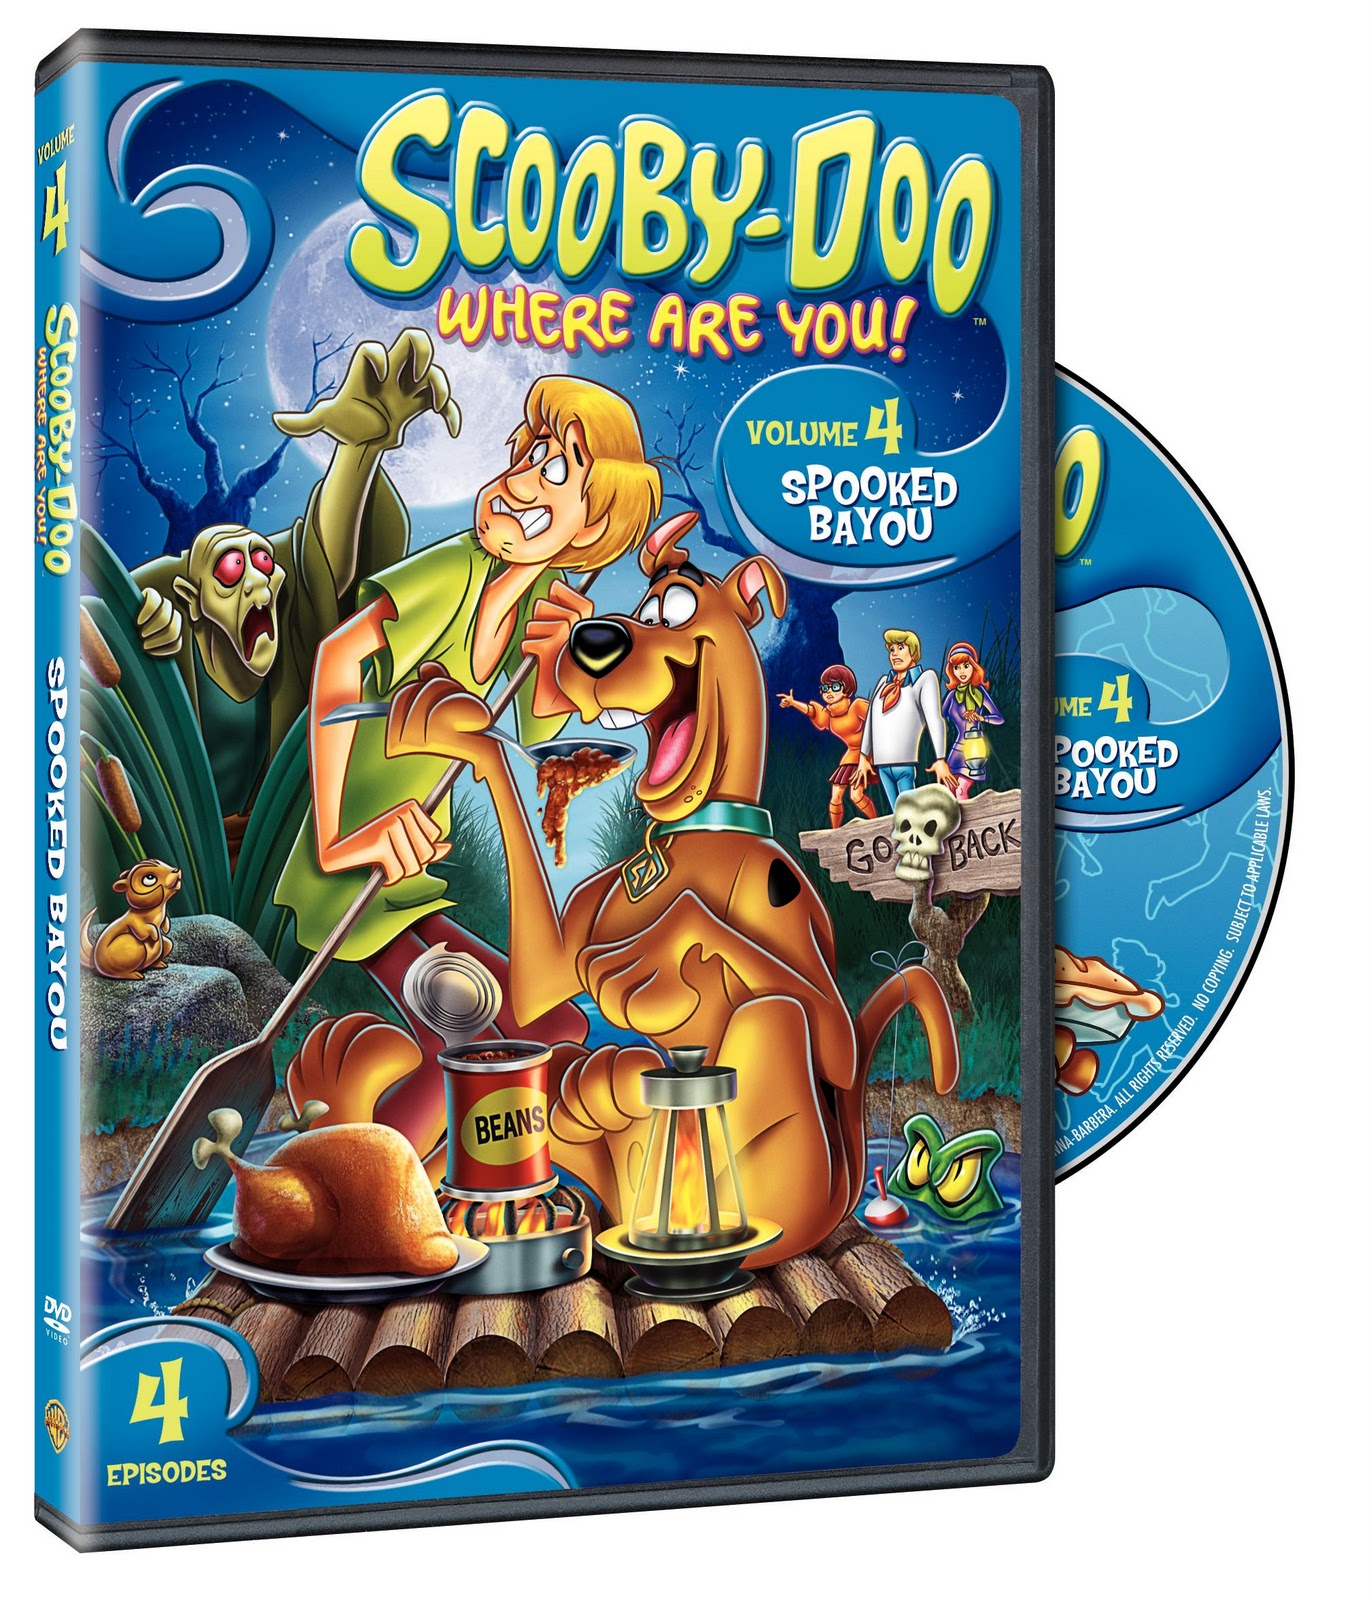  Scooby  Doo  Halloween  Prize Pack Giveaway Closed 